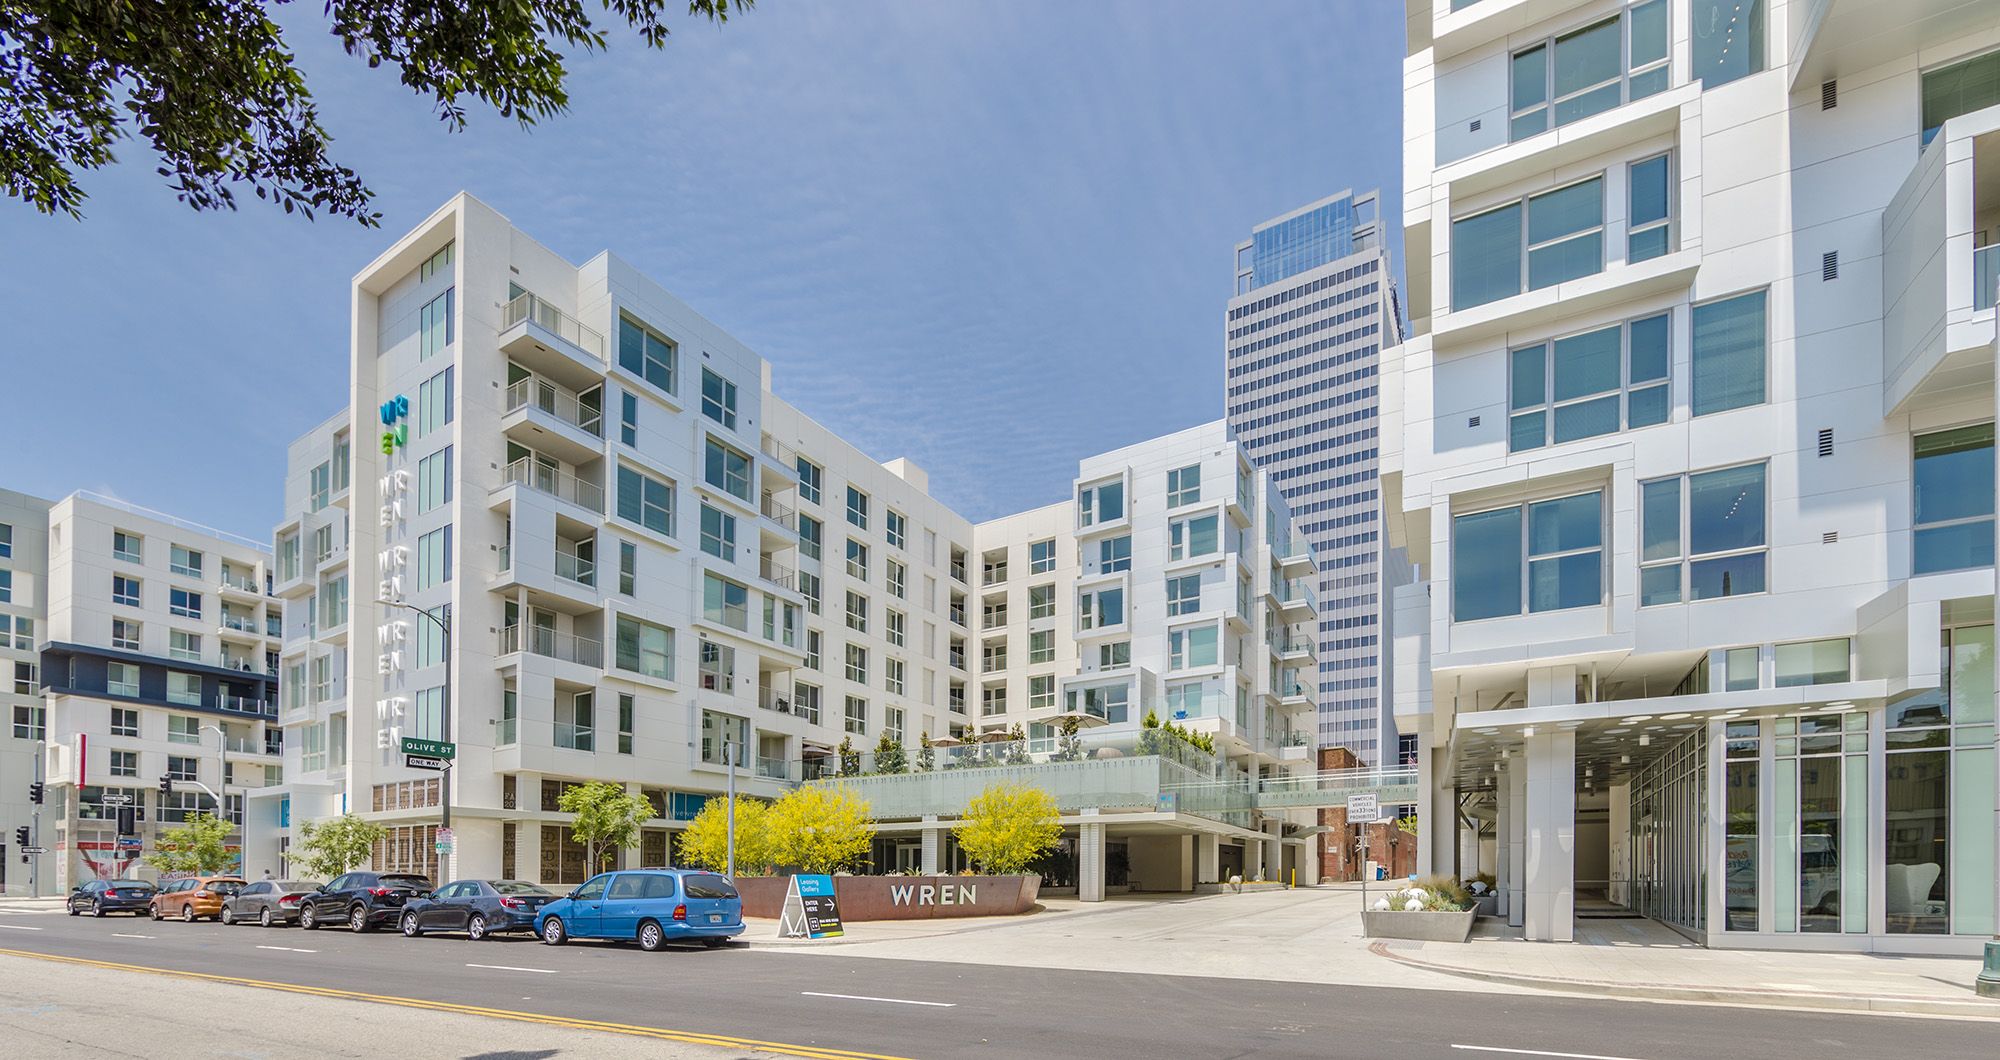 Multifamily, mid-rise buildings using wood construction